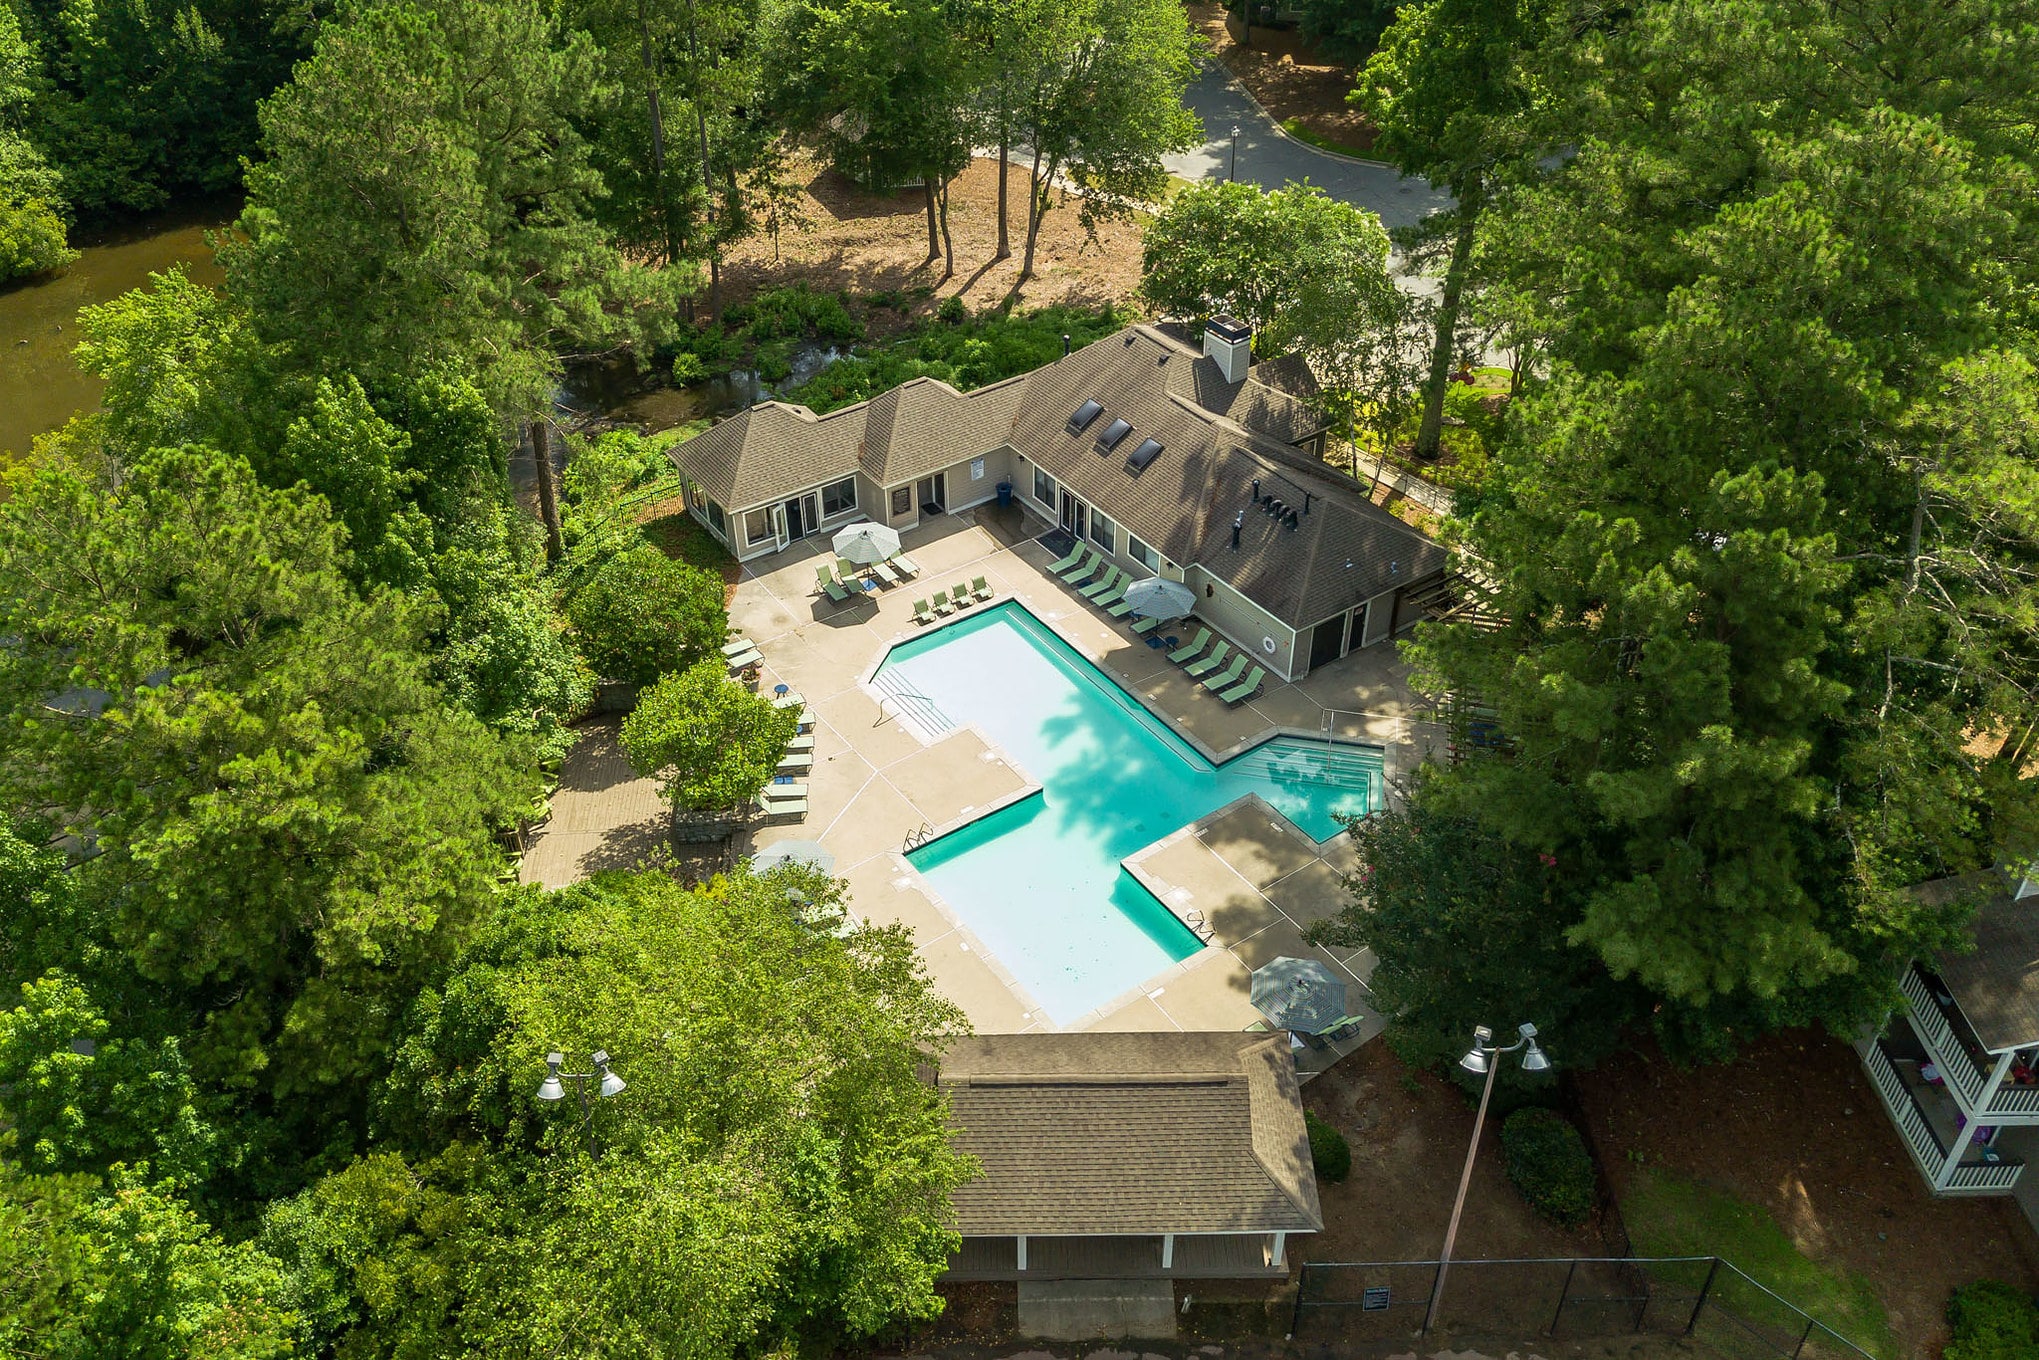 An aerial view of a pool surrounded by trees, ideal for residents of a two bedroom apartment looking for a relaxing outdoor space.